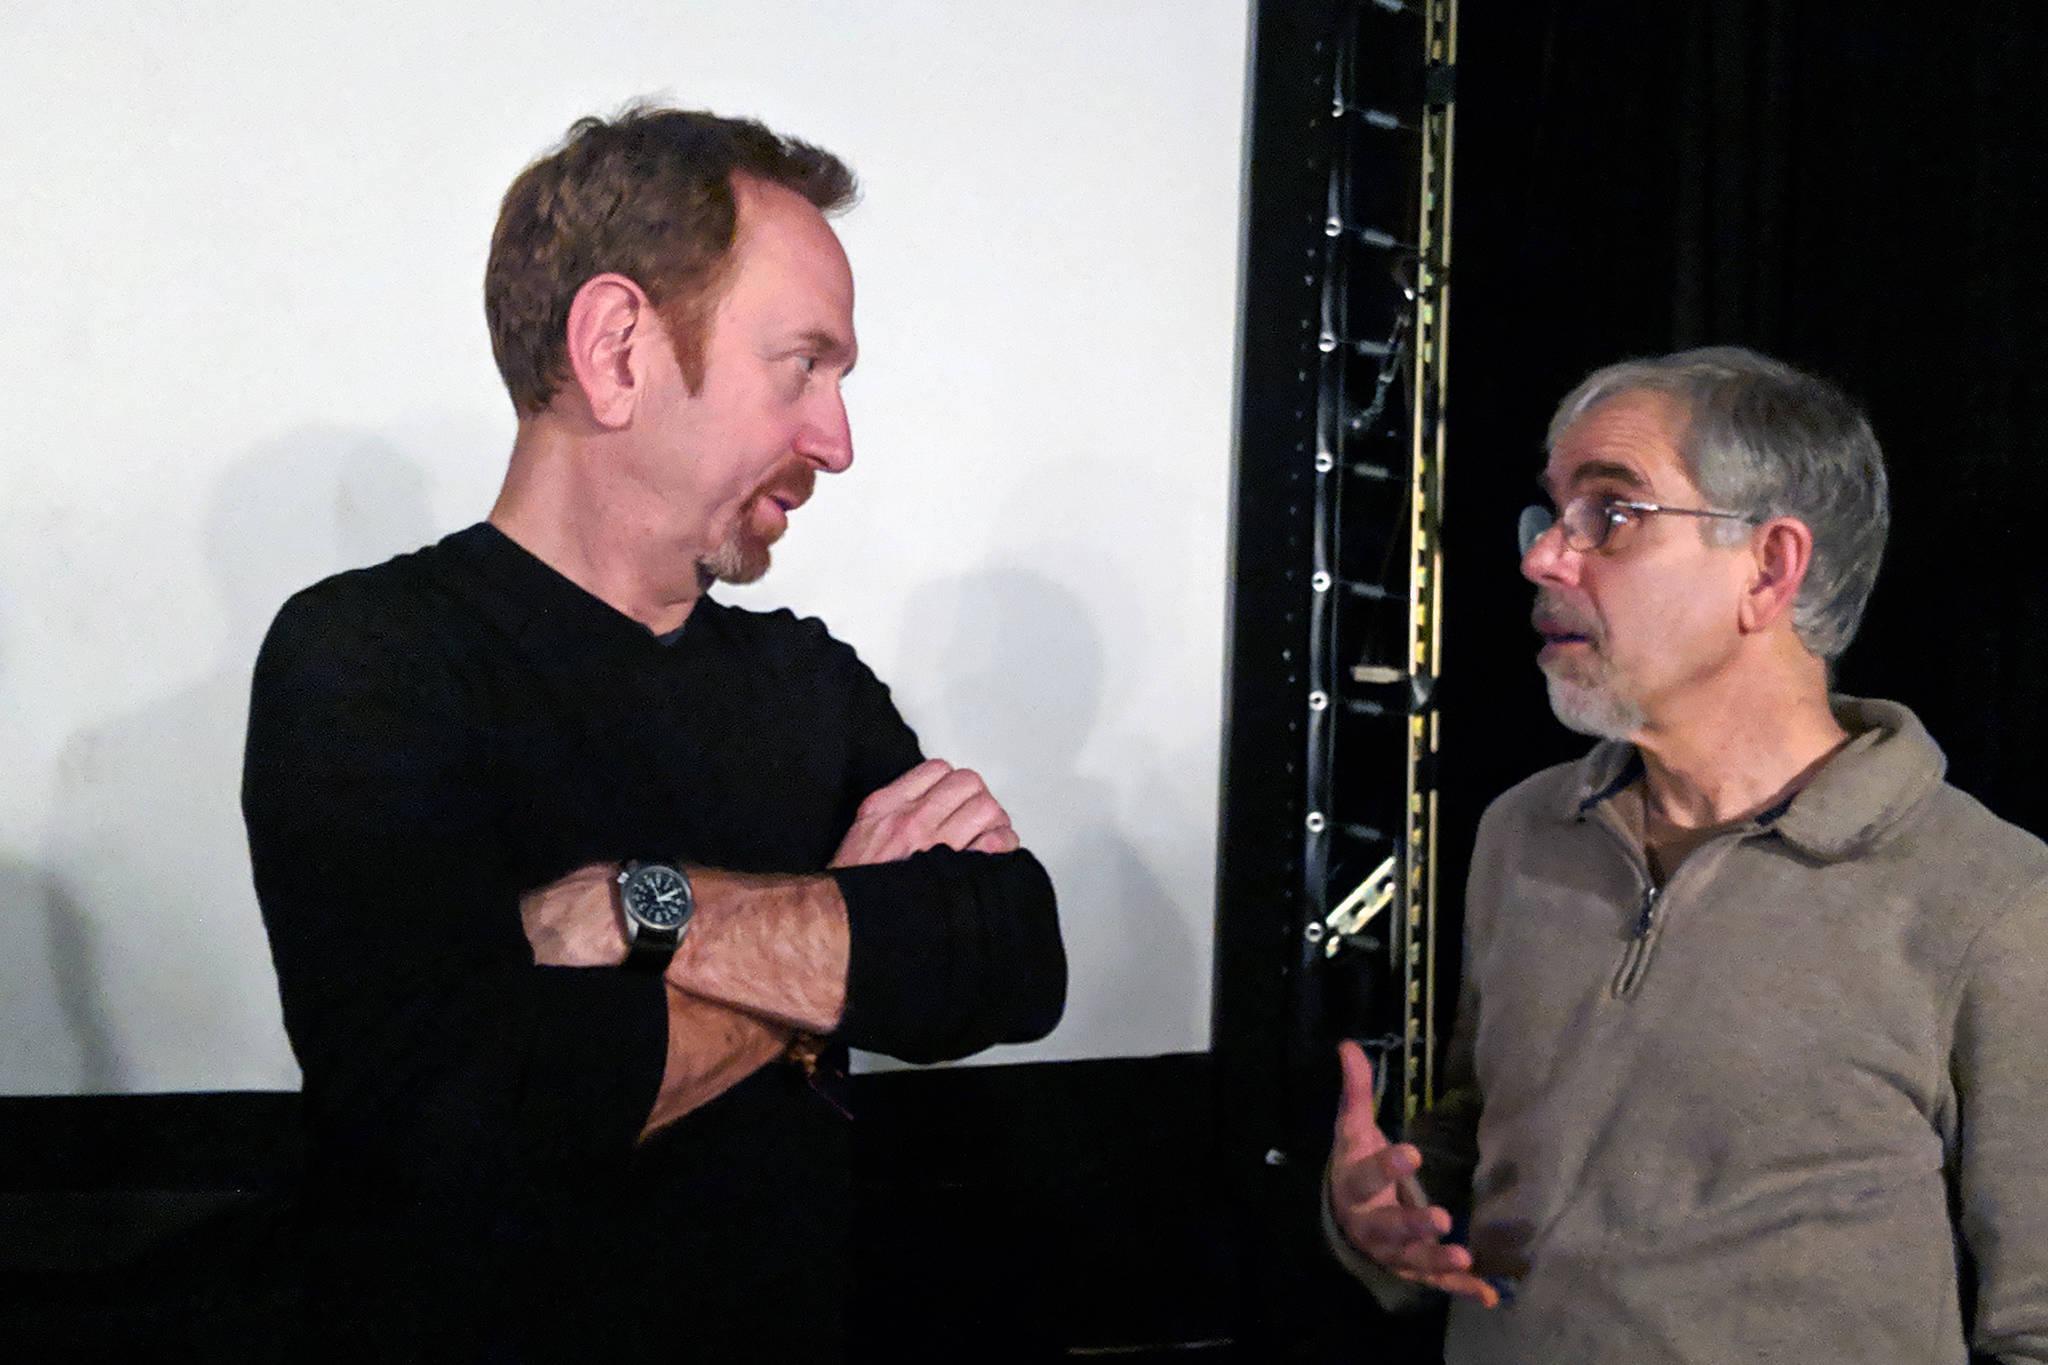 Aaron Davidman, “Wrestling Jerusalem” writer and actor, talks with Rich Moniak of Juneau People for Peace and Justice after a screening of the film, Thursday, Jan. 11, 2019. (Ben Hohenstatt | Capital City Weekly)